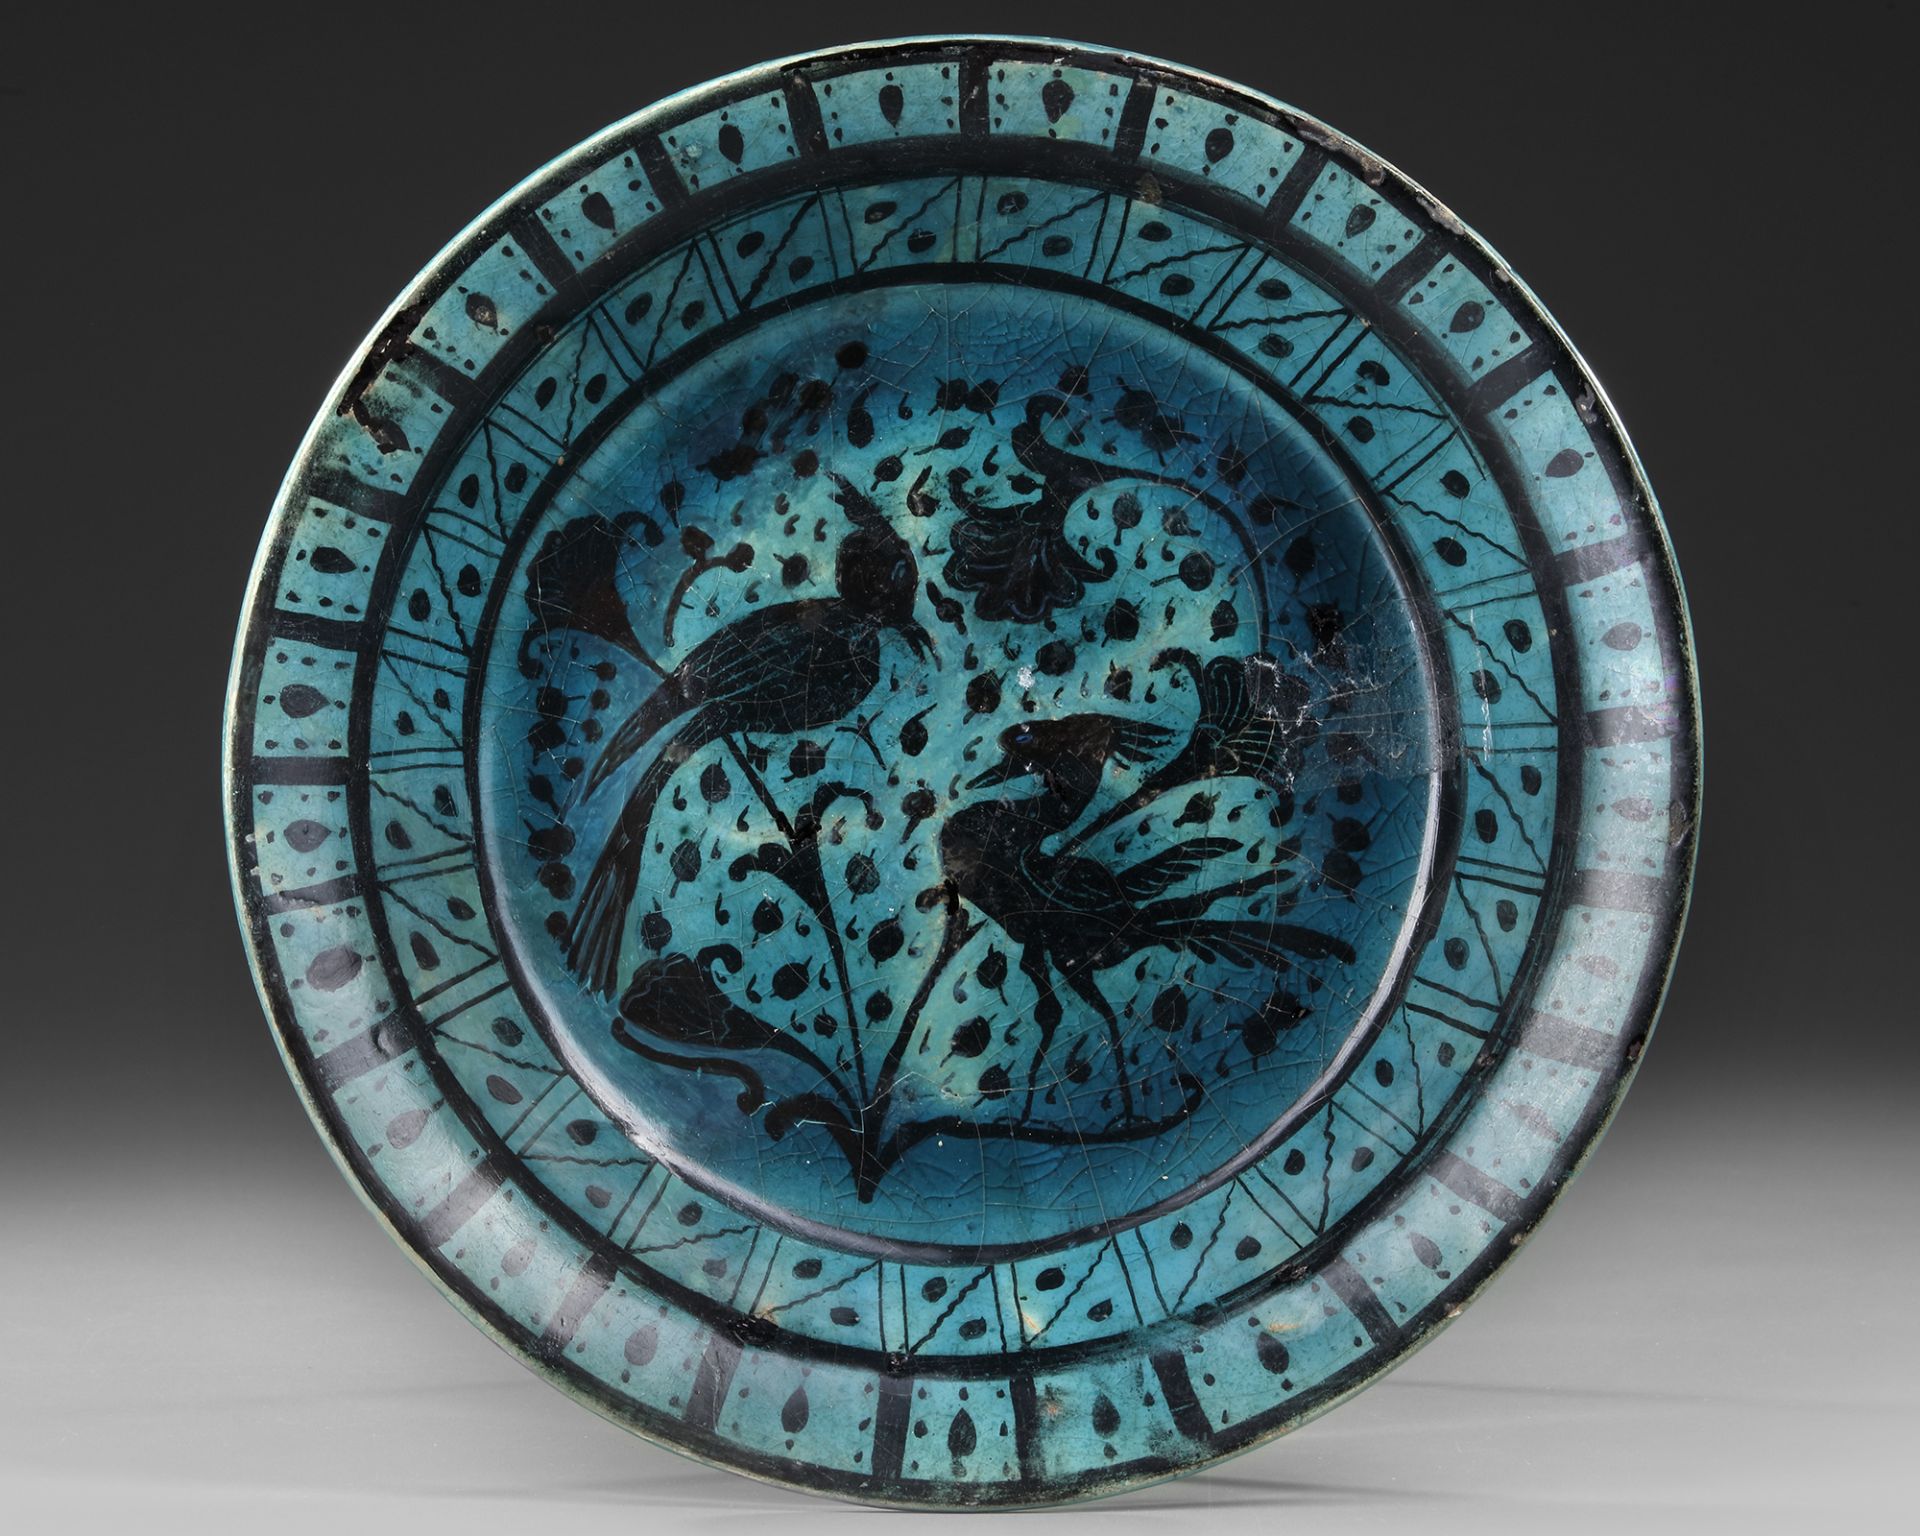 A RAQQA TURQUOISE-GLAZED POTTERY DISH, SYRIA, EARLY 13TH CENTURY